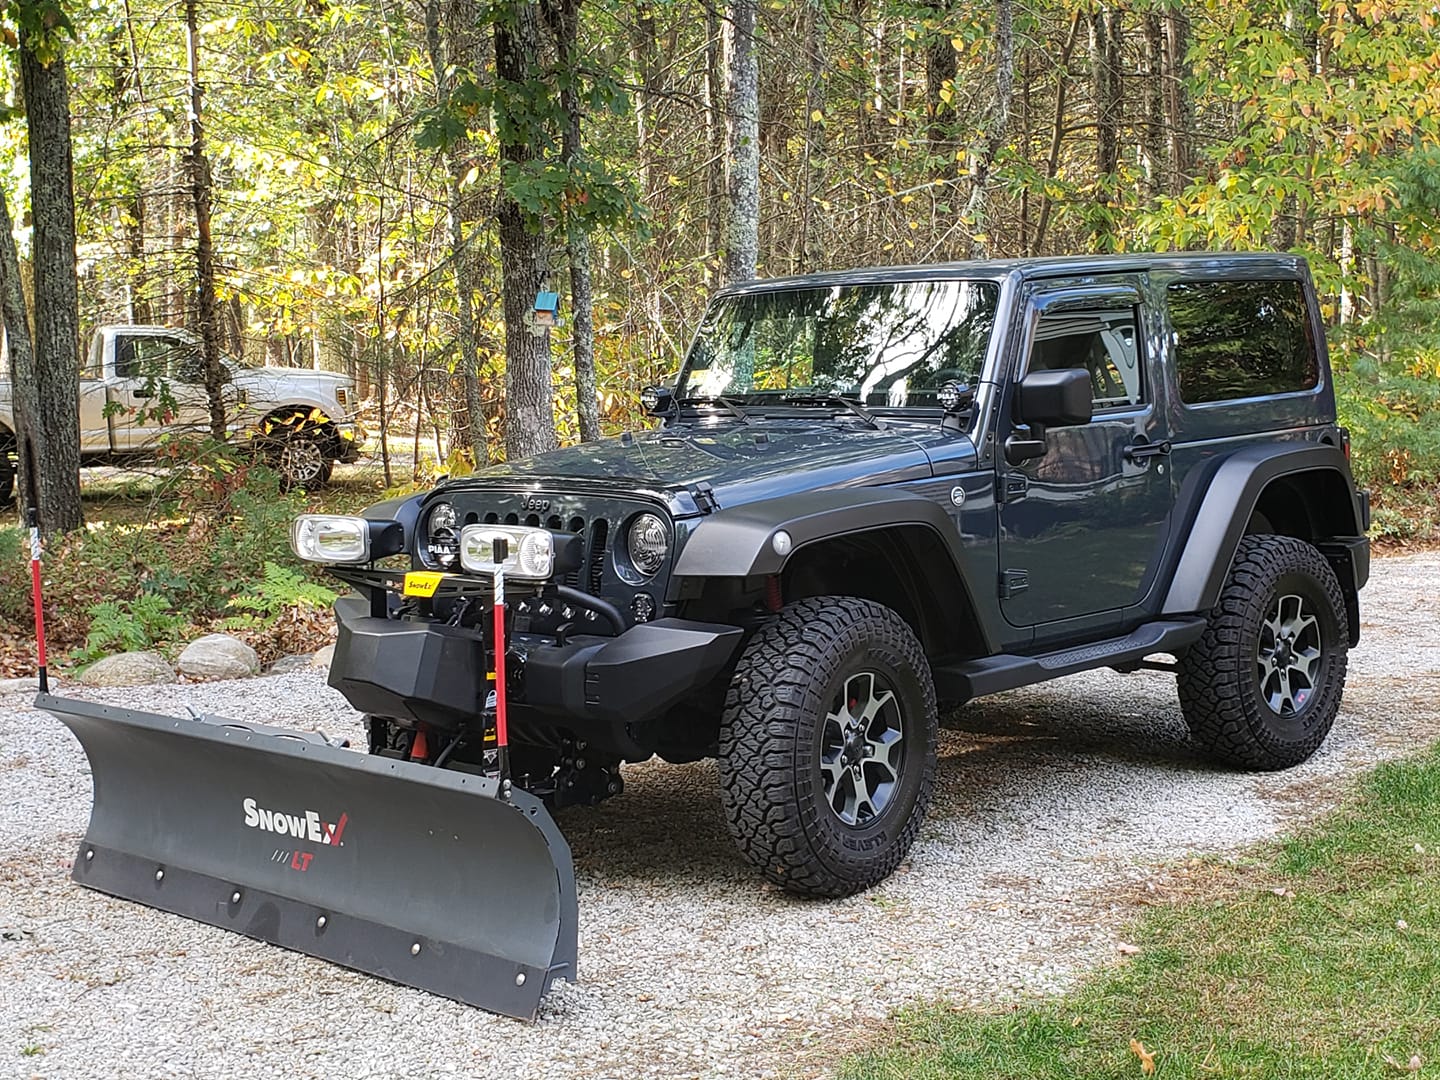 Thinking of a snow plow | Jeep Wrangler TJ Forum